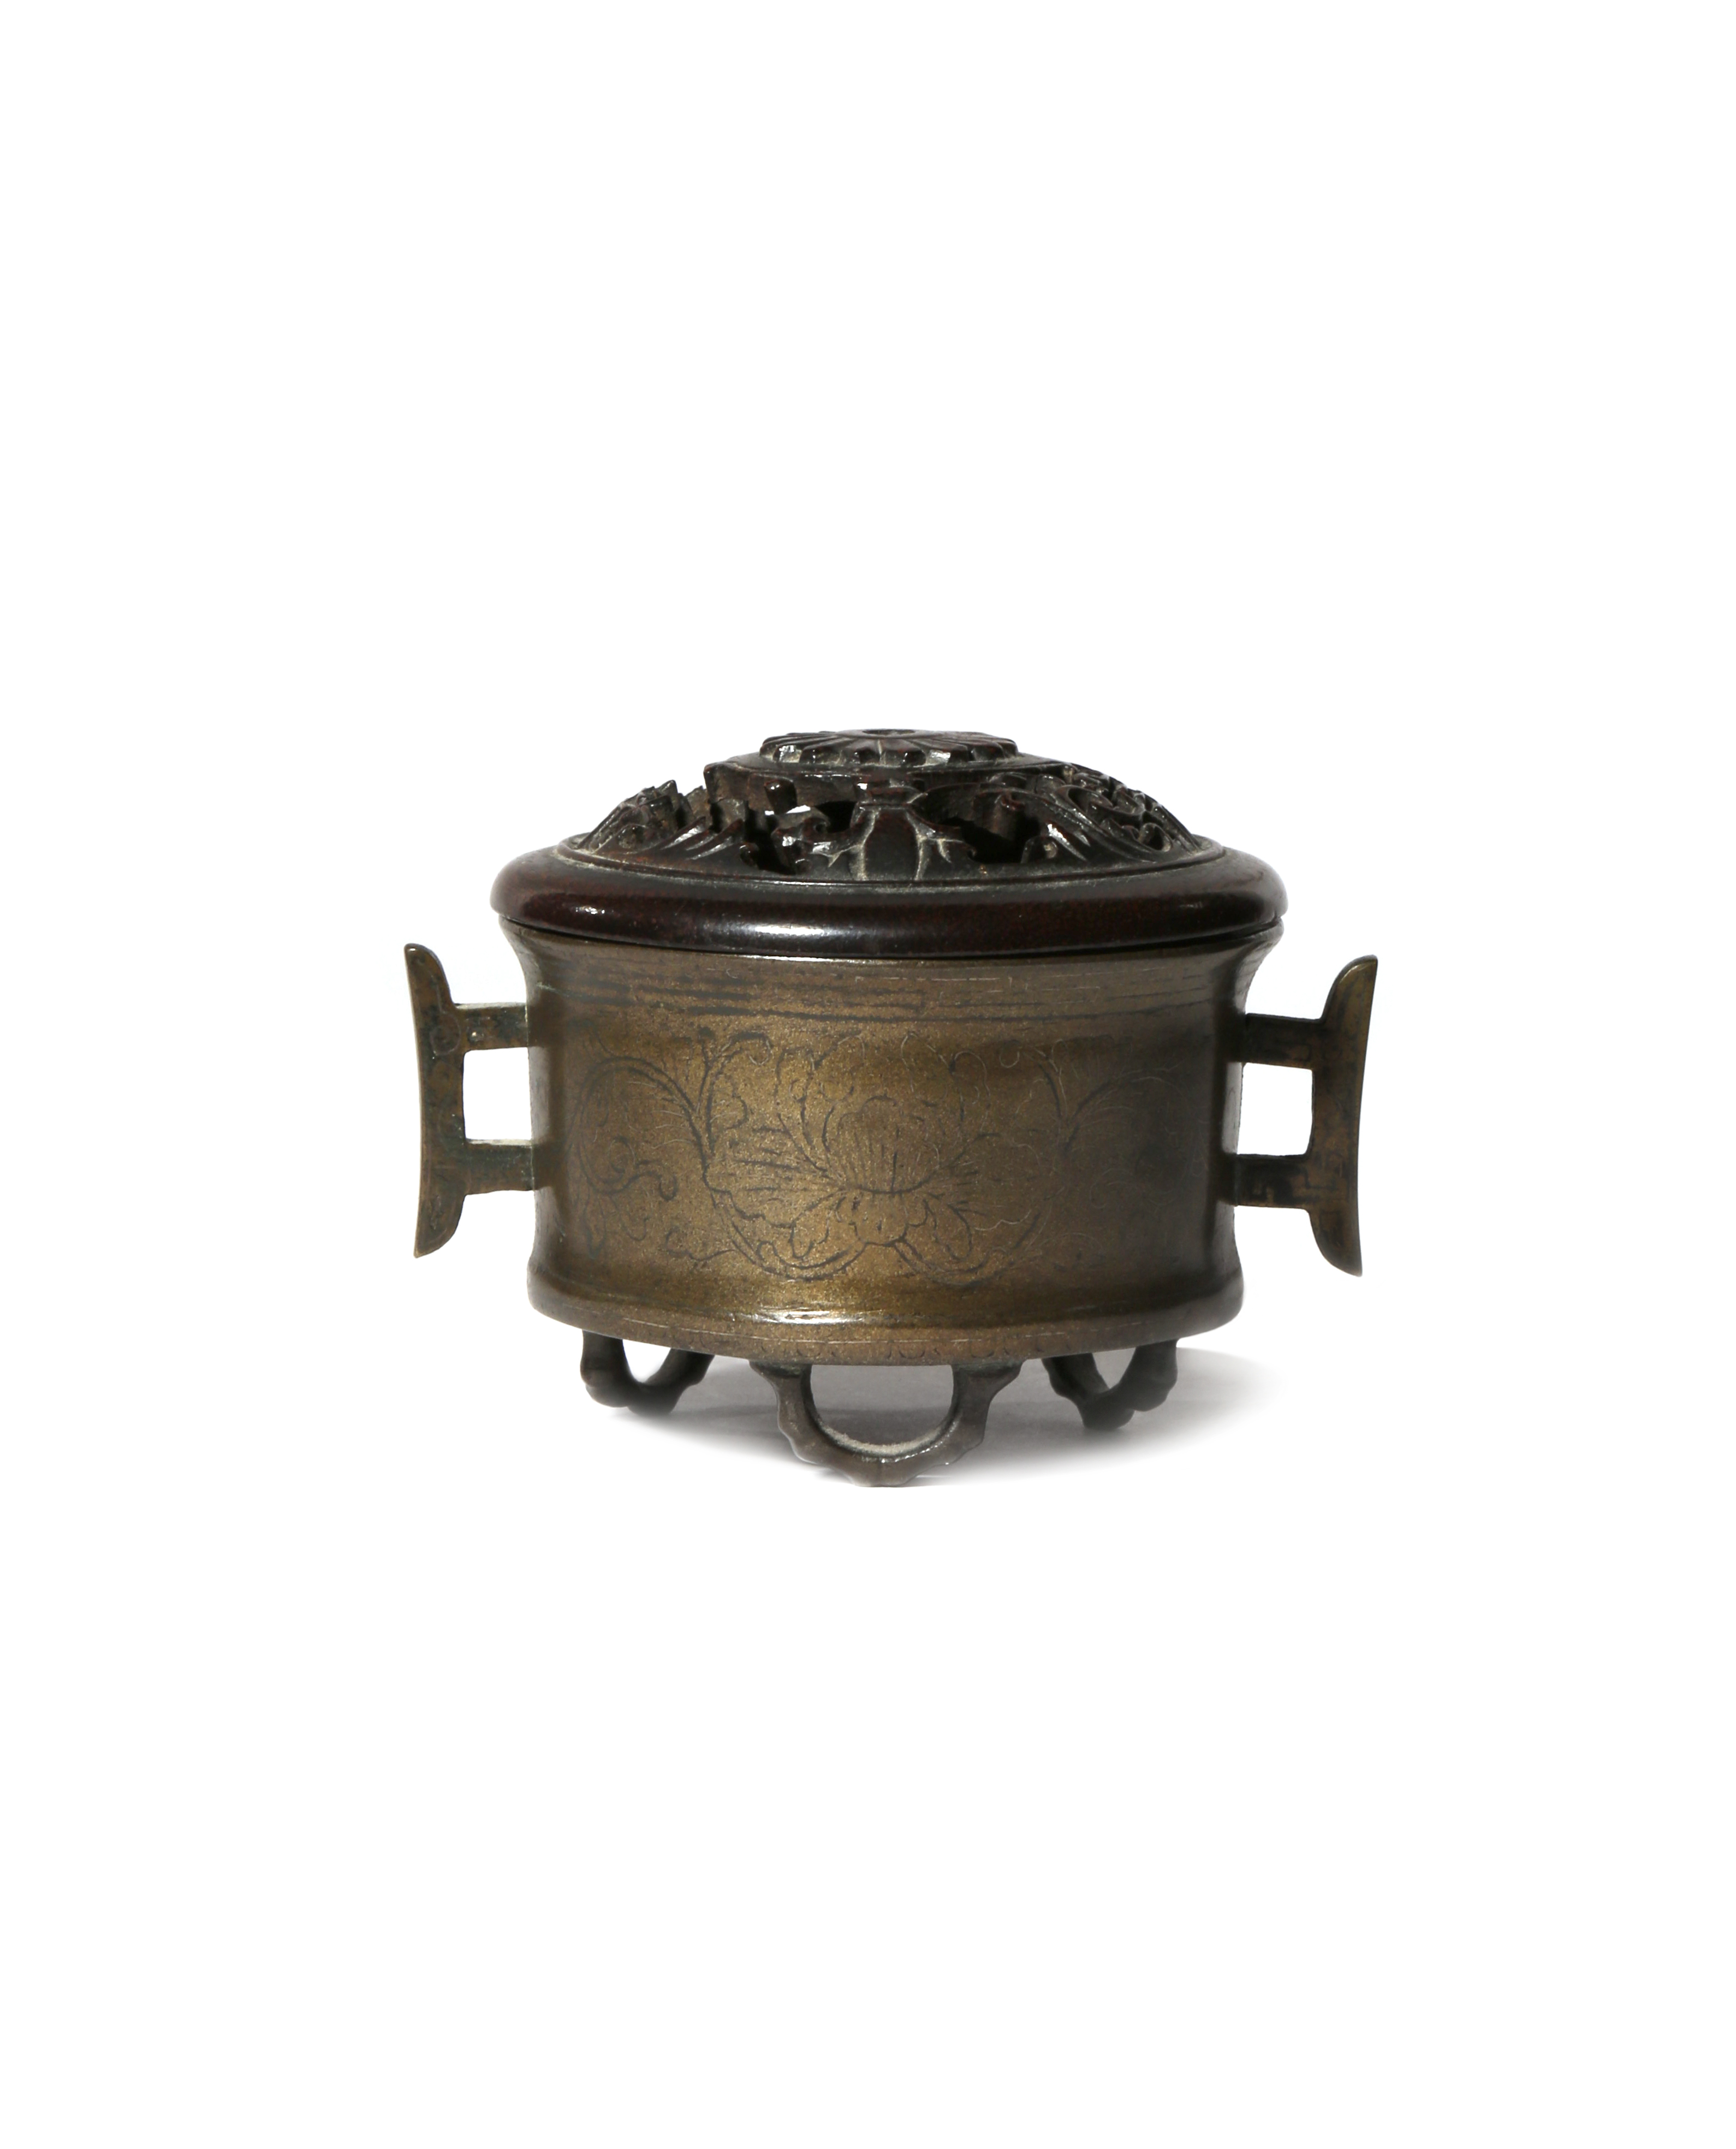 A SMALL CHINESE 'SHI SOU' BRONZE INCENSE BURNER 18TH/19TH CENTURY The cylindrical body inlaid with